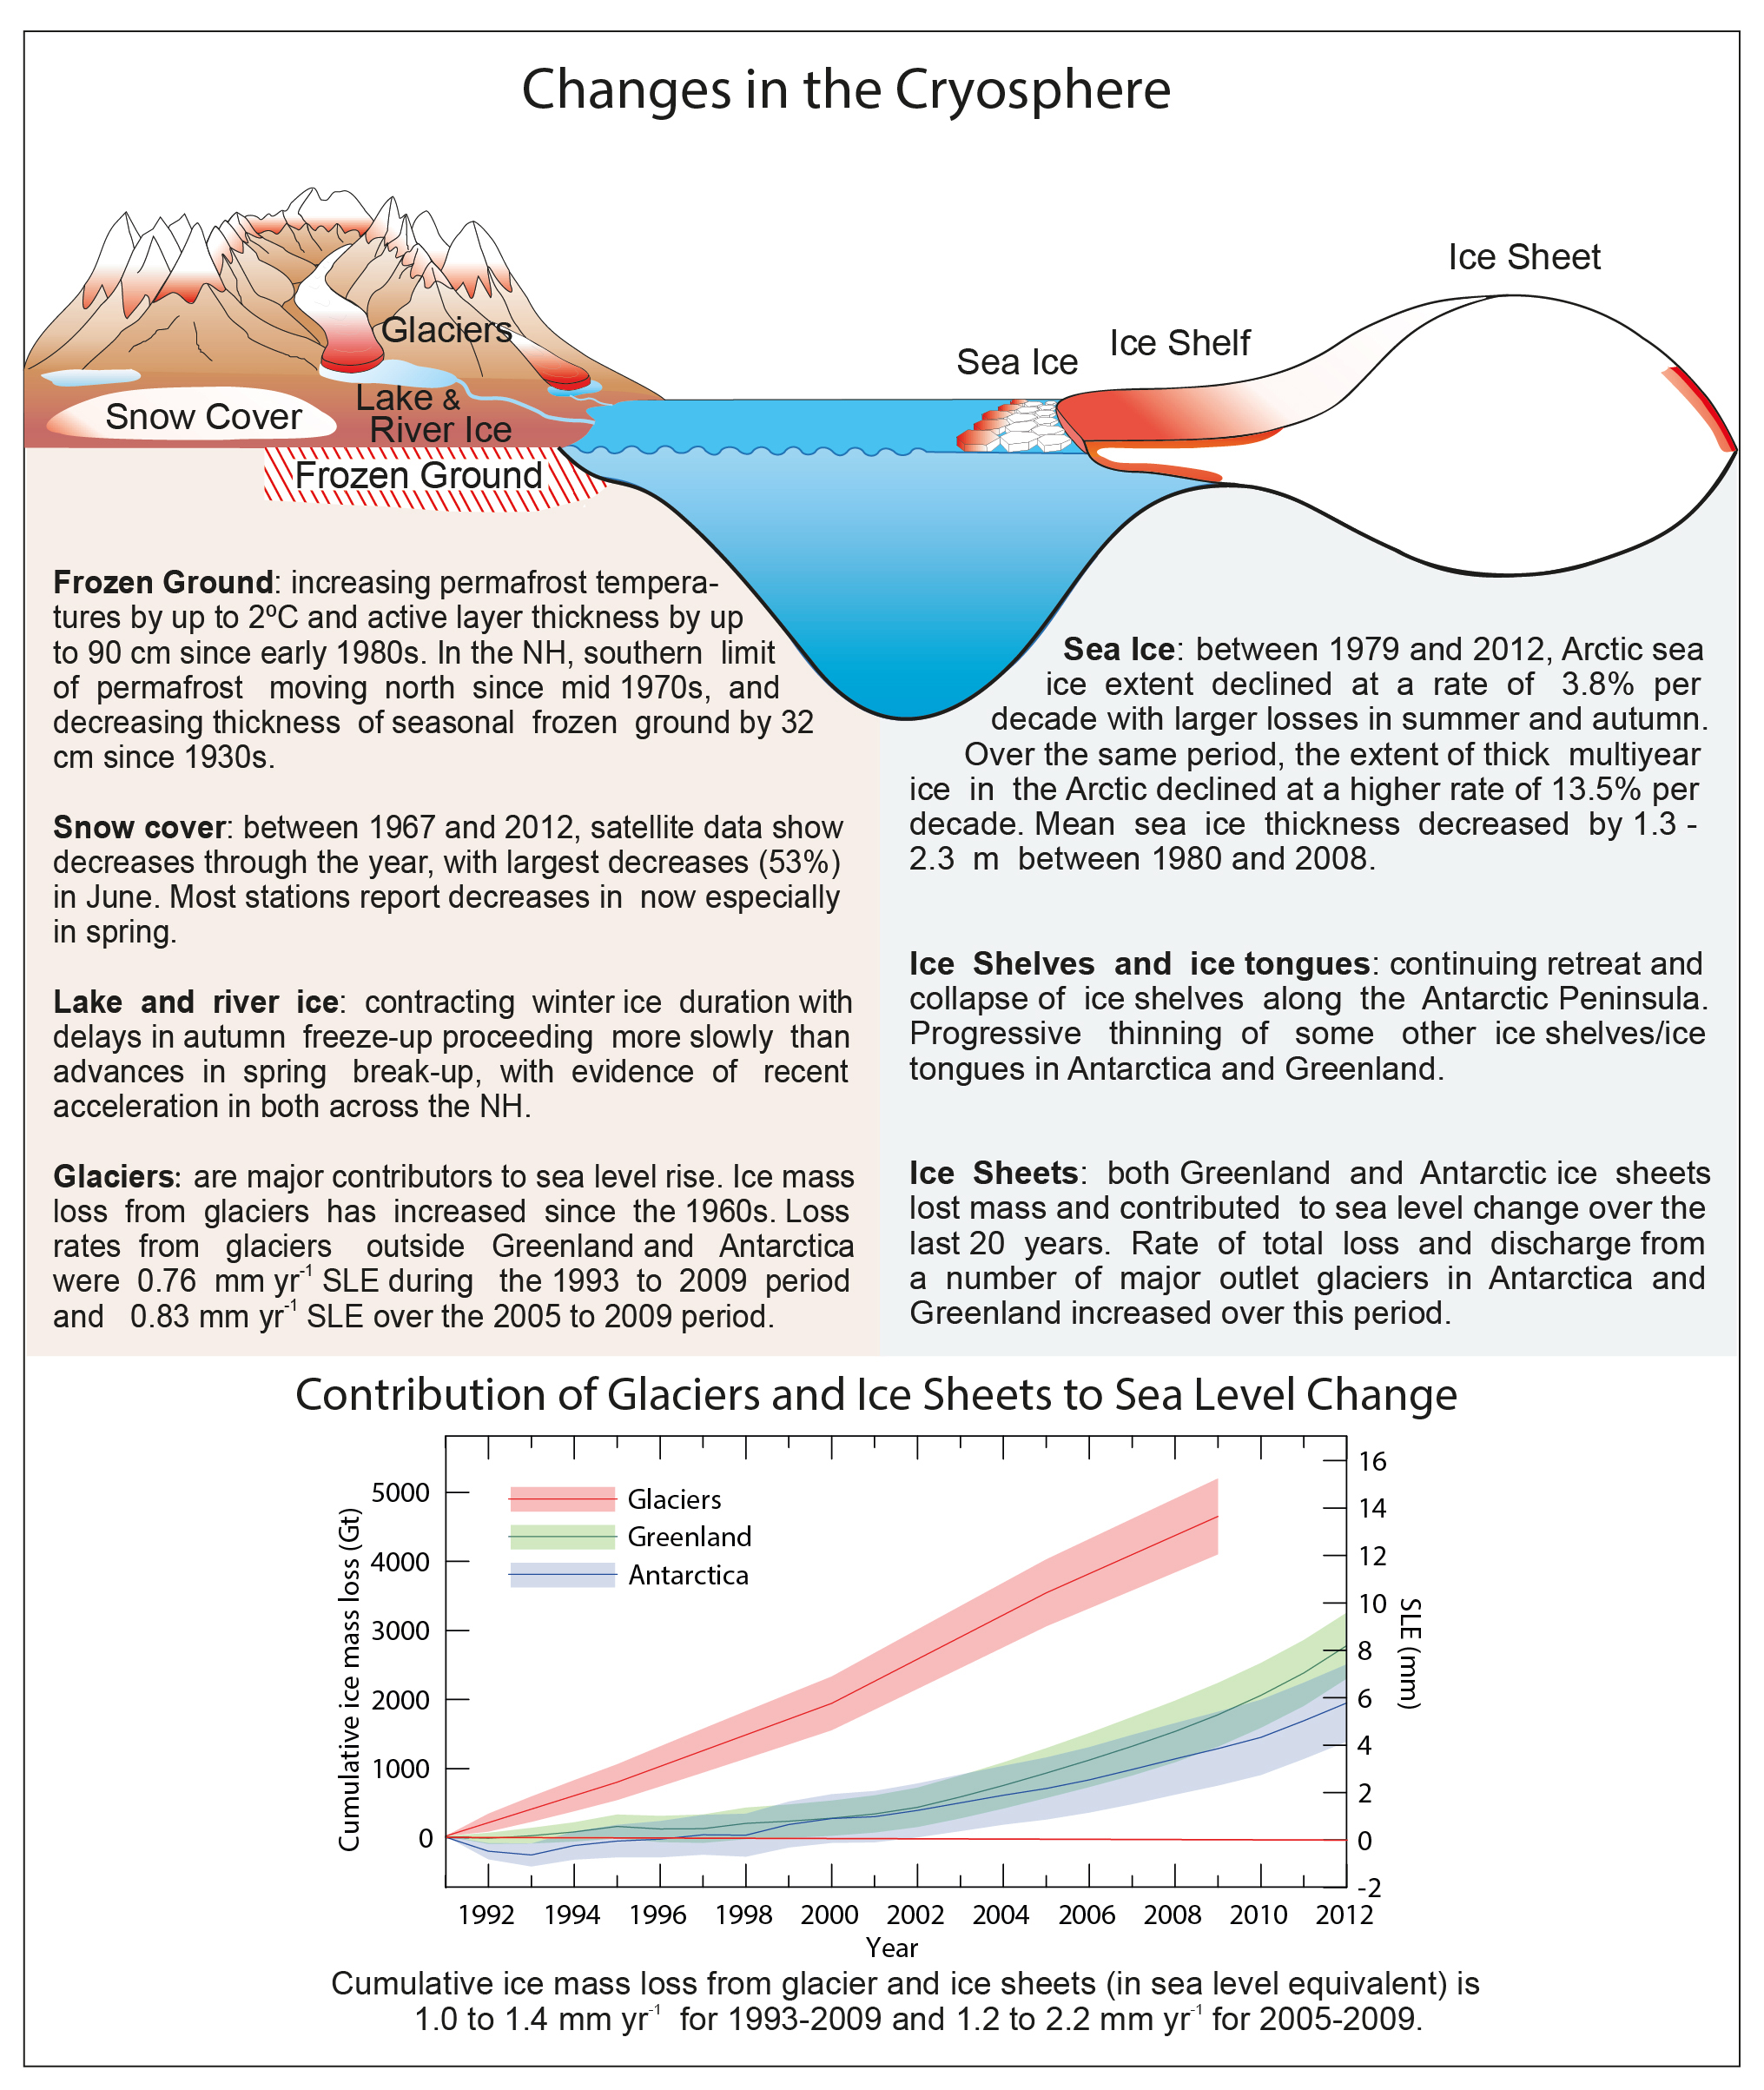 Current contributions of glaciers and ice sheets to global sea level rise. From the IPCC AR5 Working Group 113